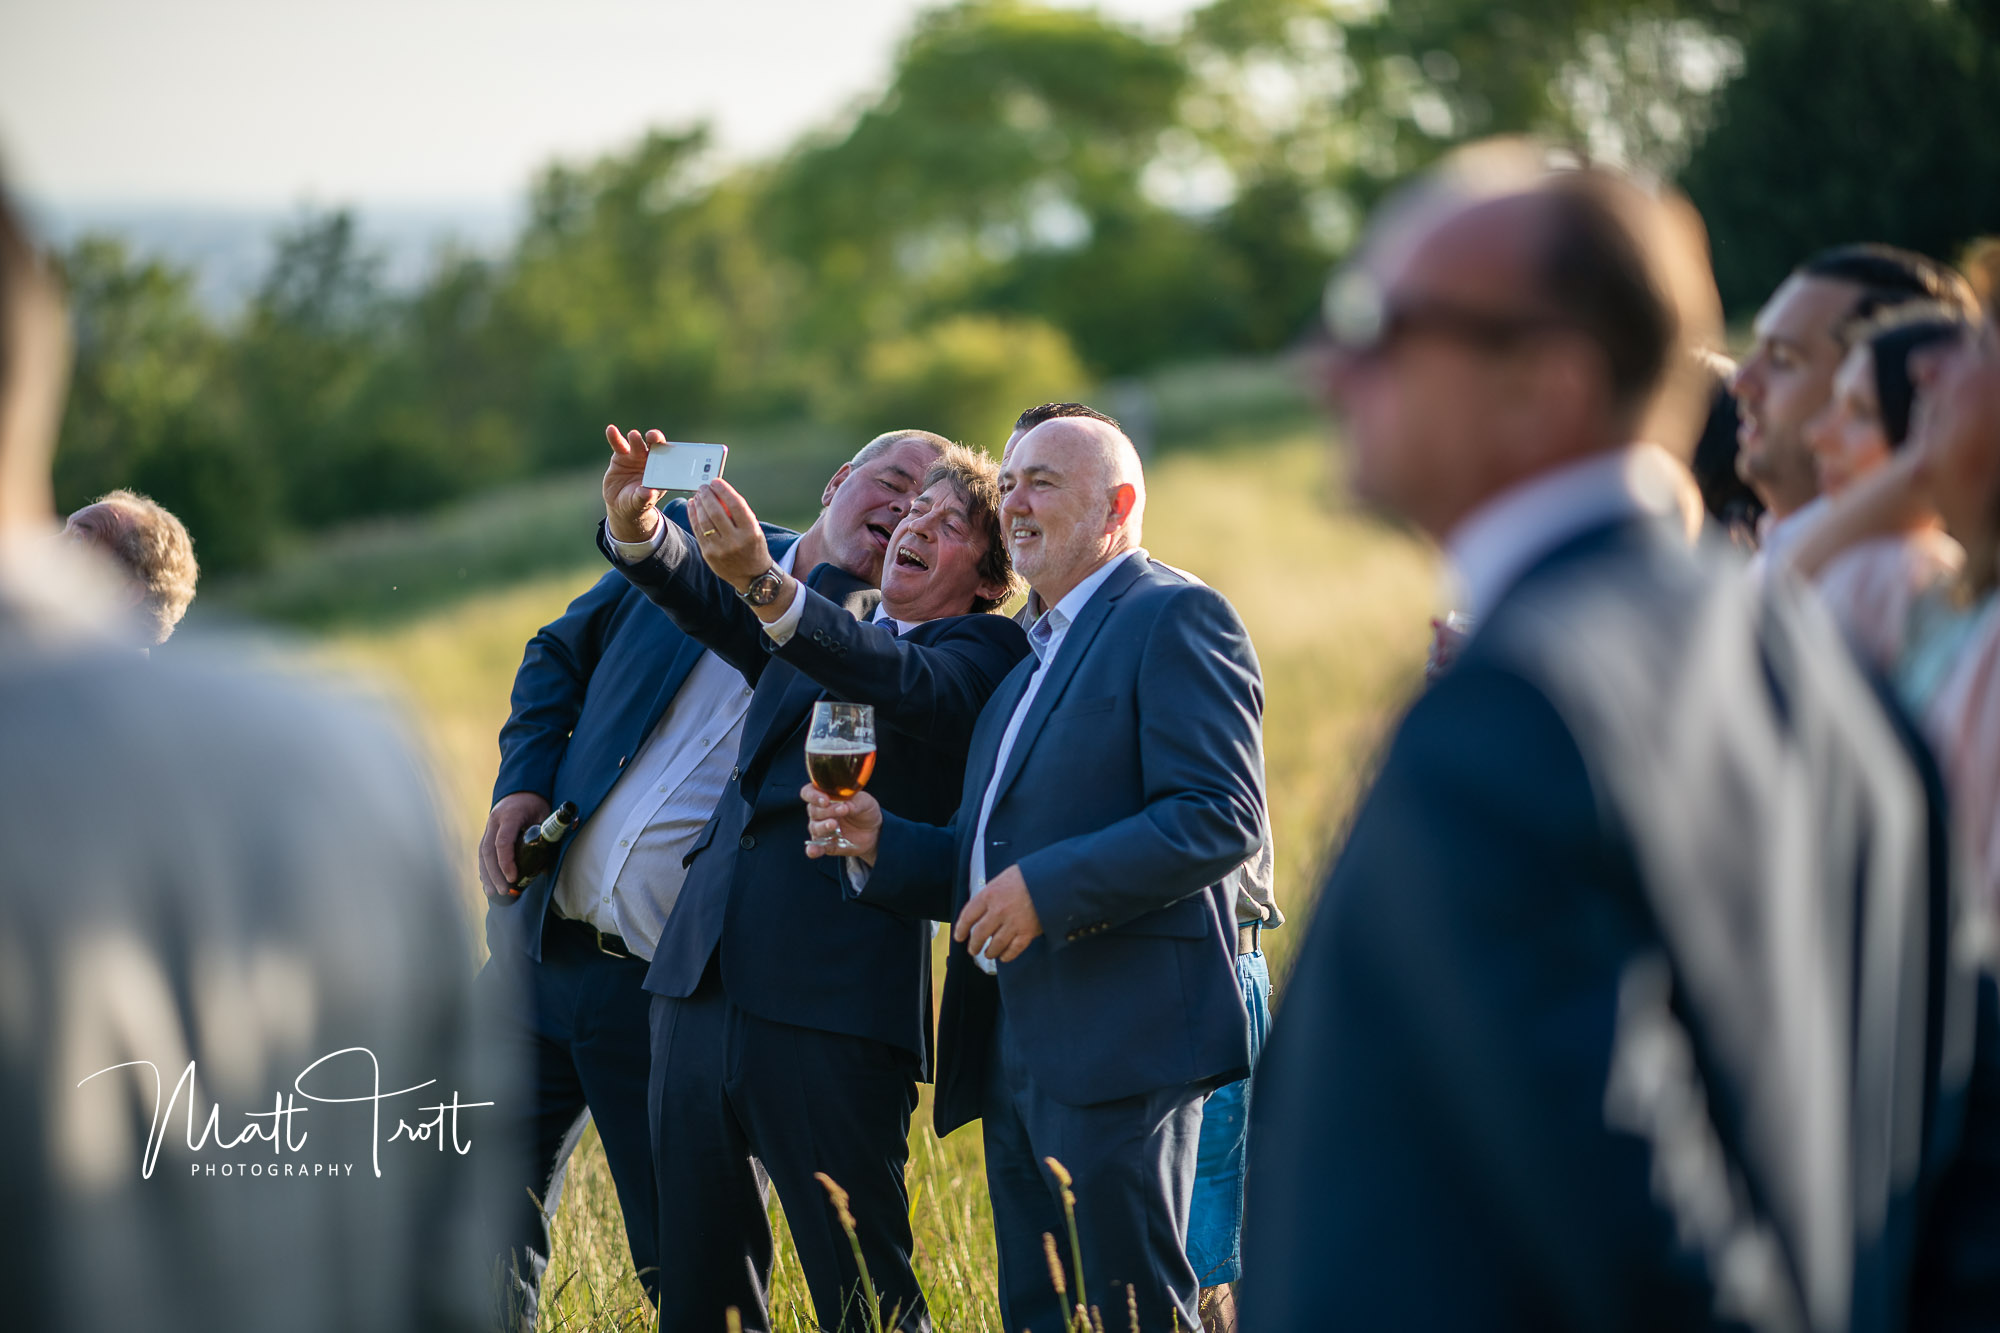 Guys taking a funny selfie at a wedding